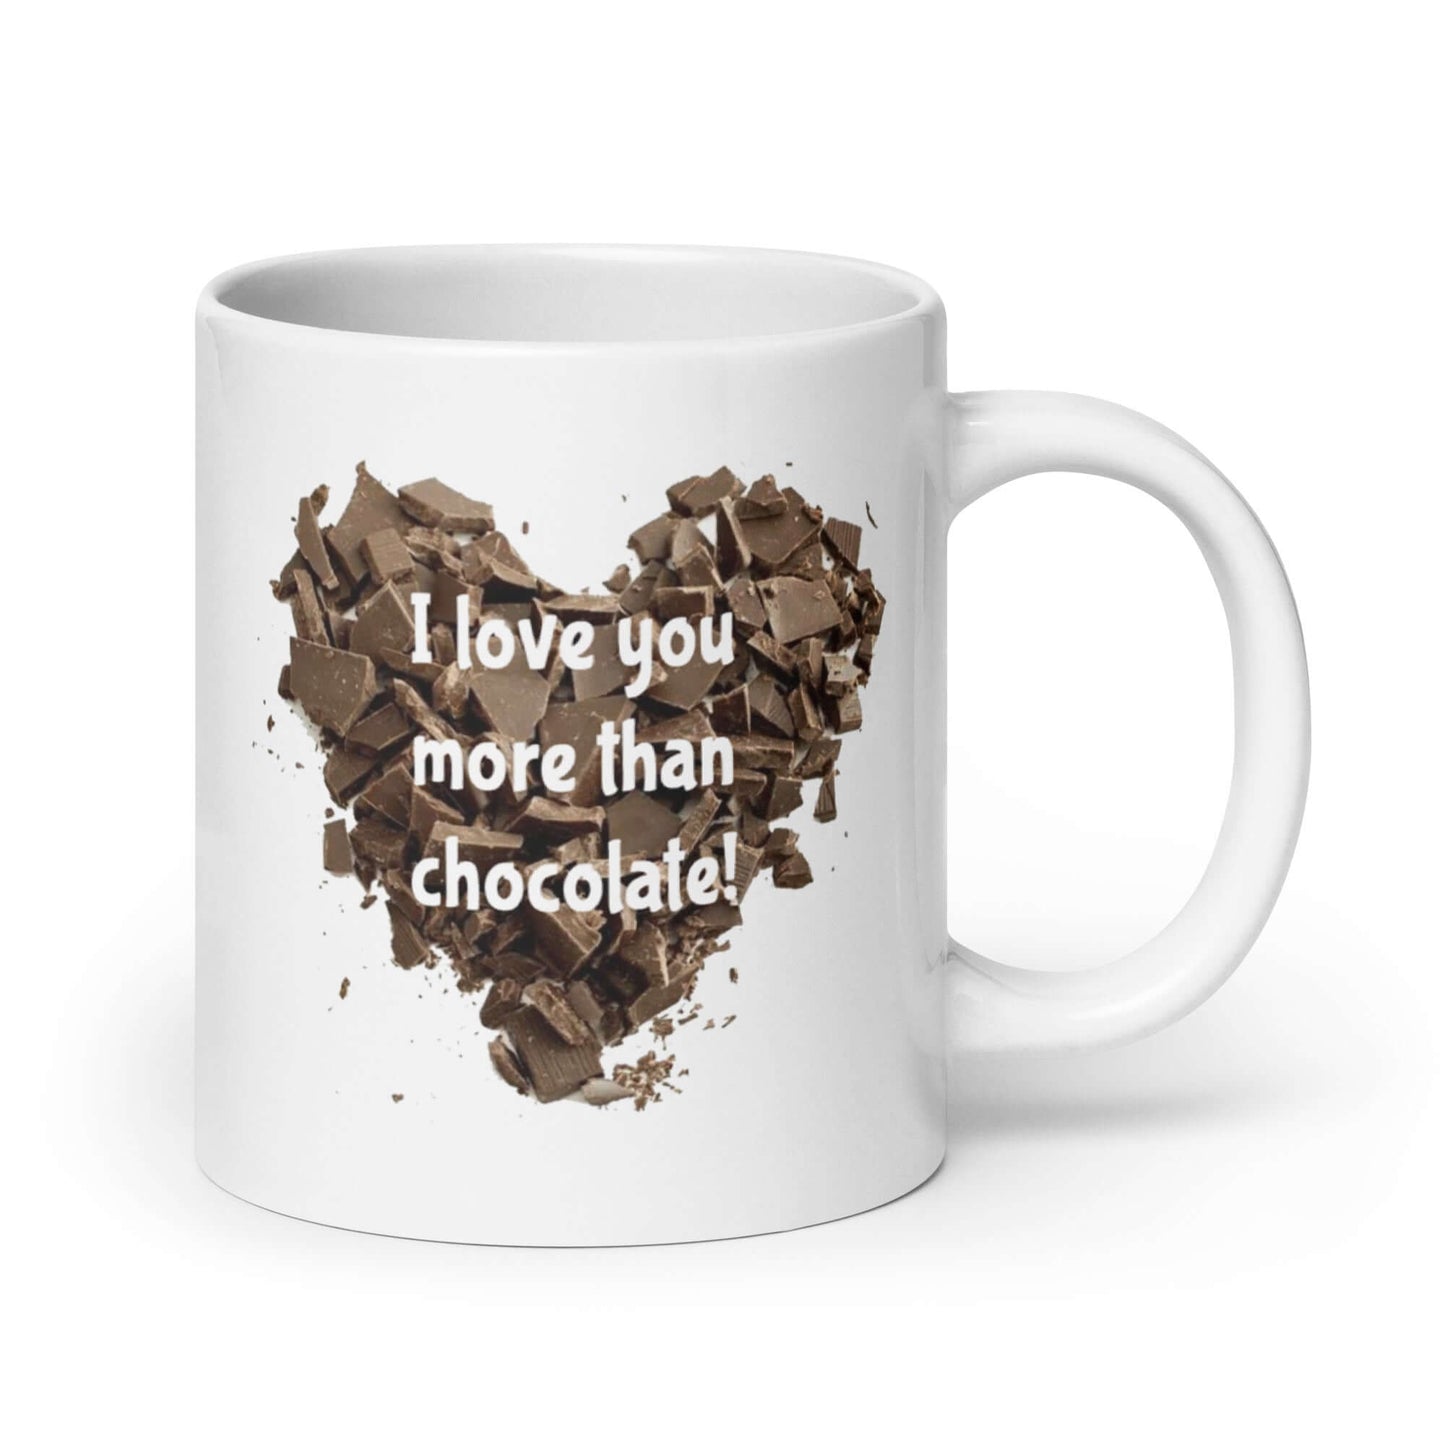 Funny I love you more than chocolate valentines day mug